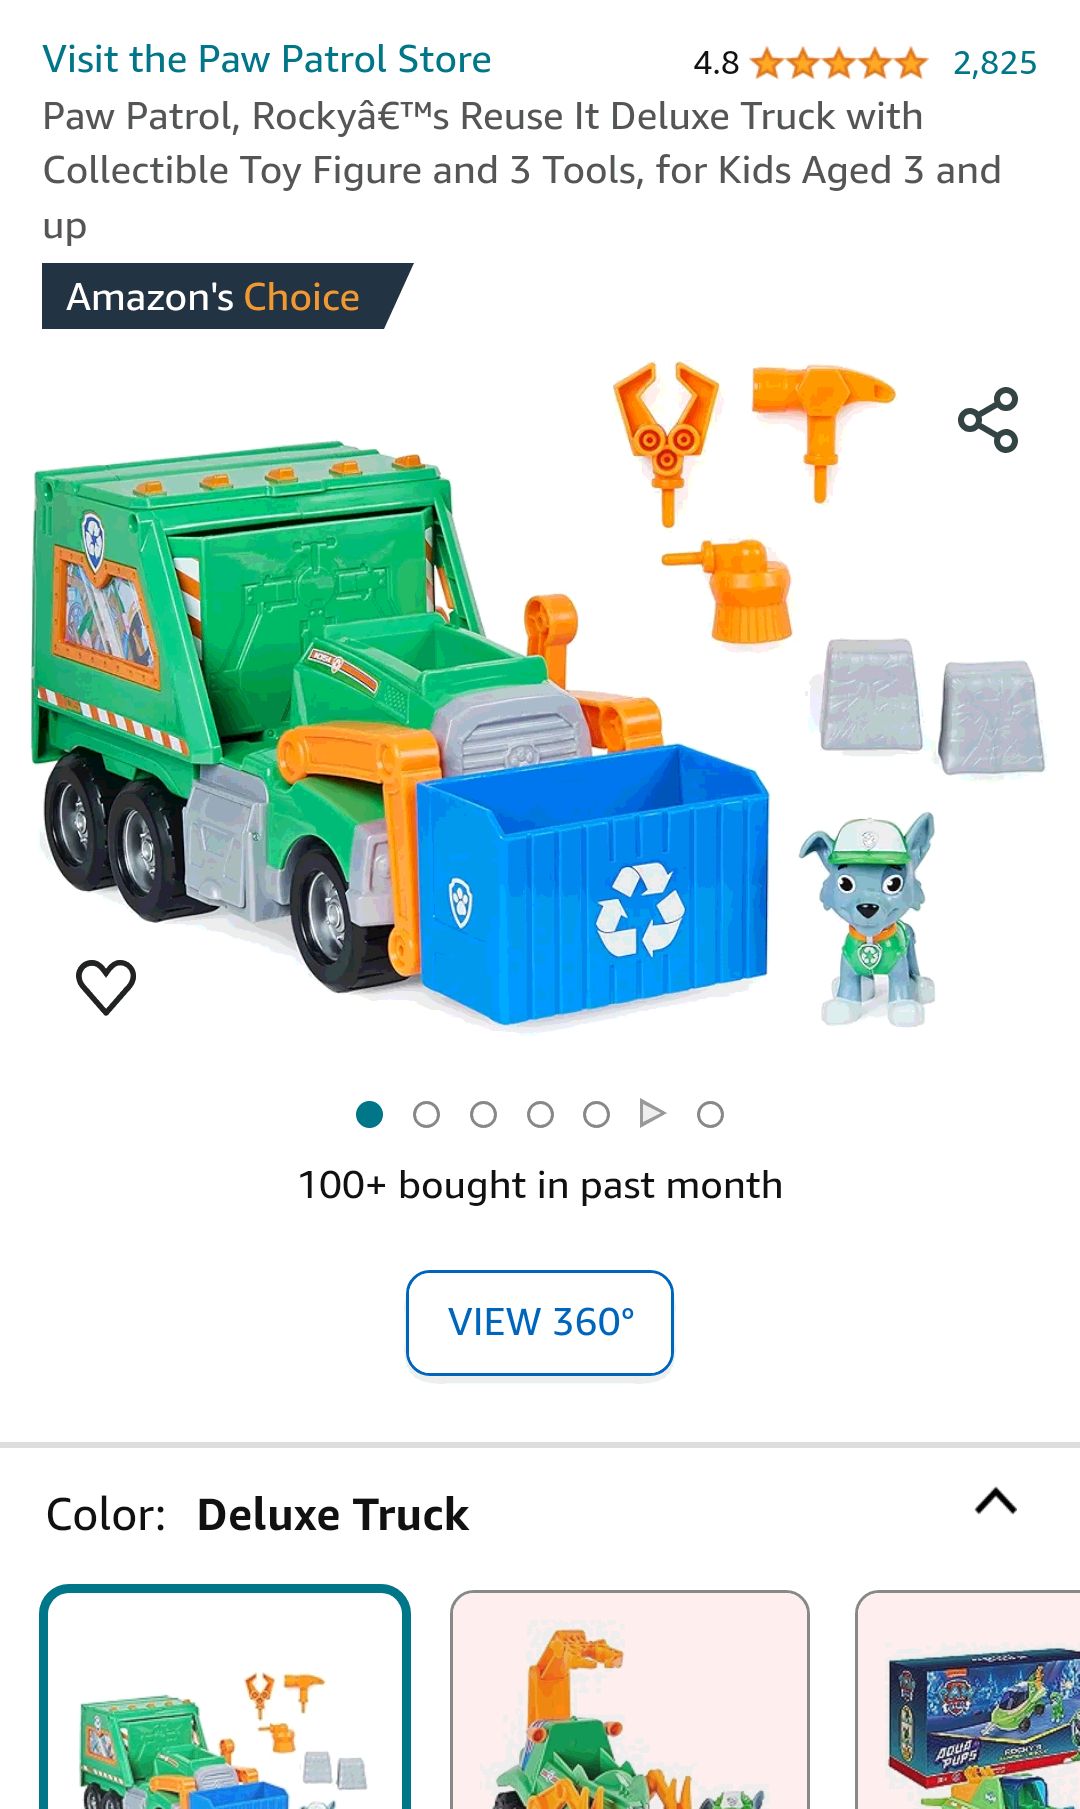 Paw Patrol, Rockyâ€™s Reuse It Deluxe Truck with Collectible Toy Figure and 3 Tools, for Kids Aged 3 and up : Everything Else